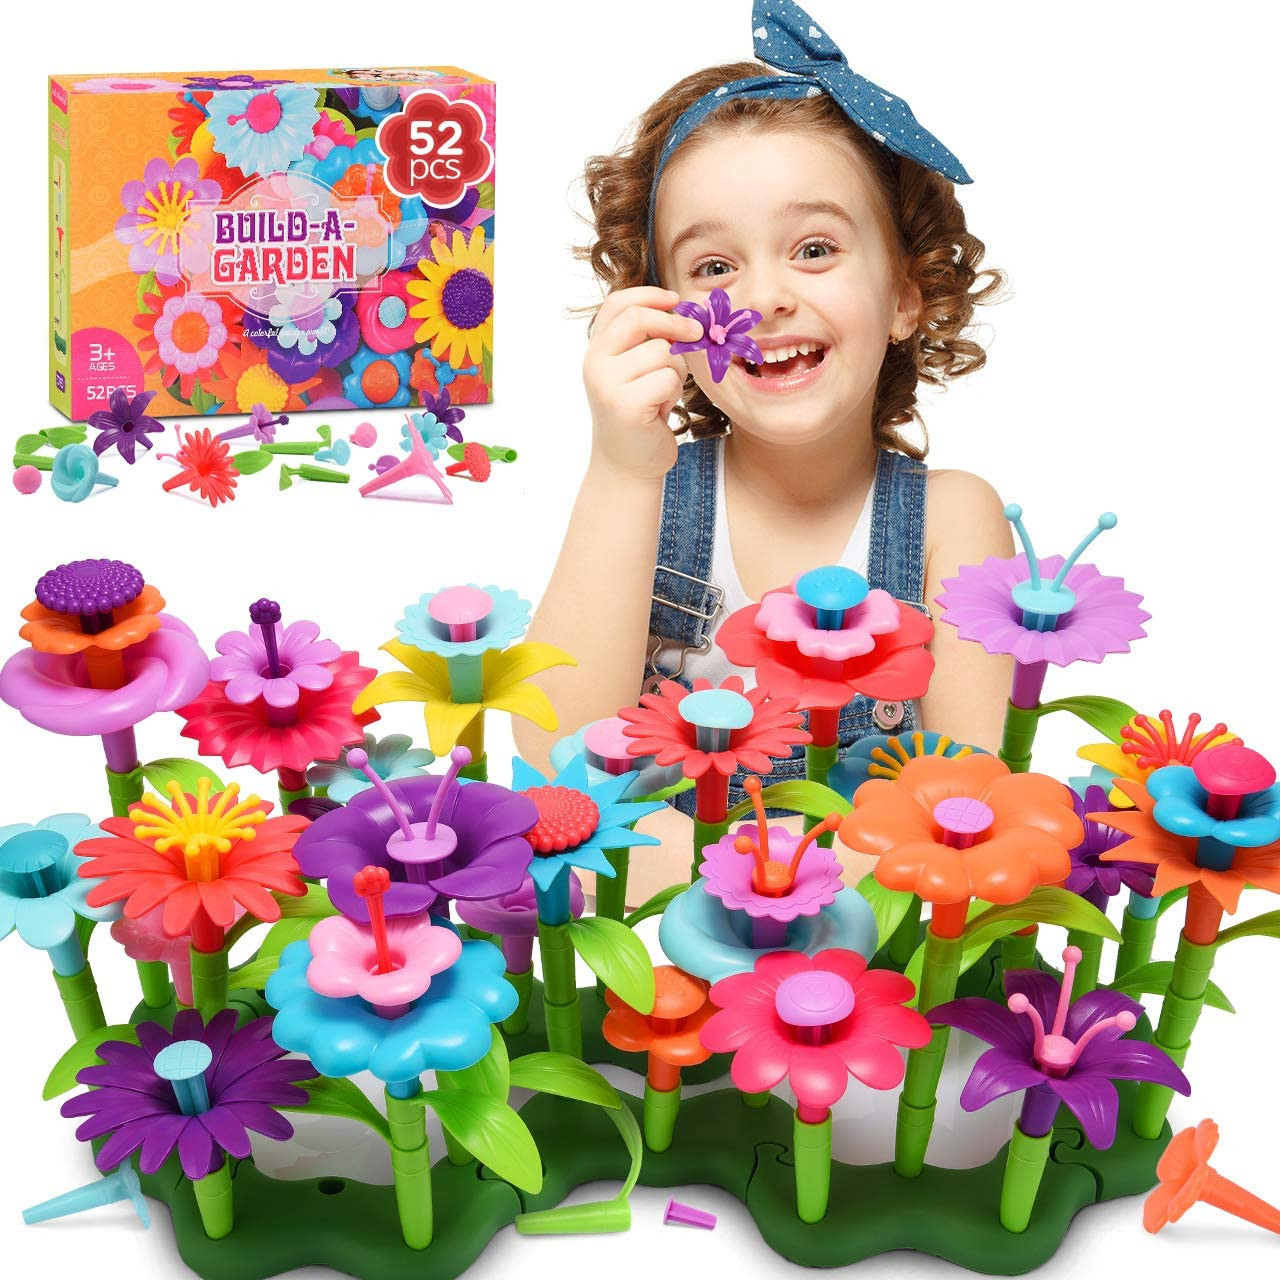 Girls Gift Ideas Age 6
 Snoky Toys for 3 12 Year Old Girls Flower Garden Building